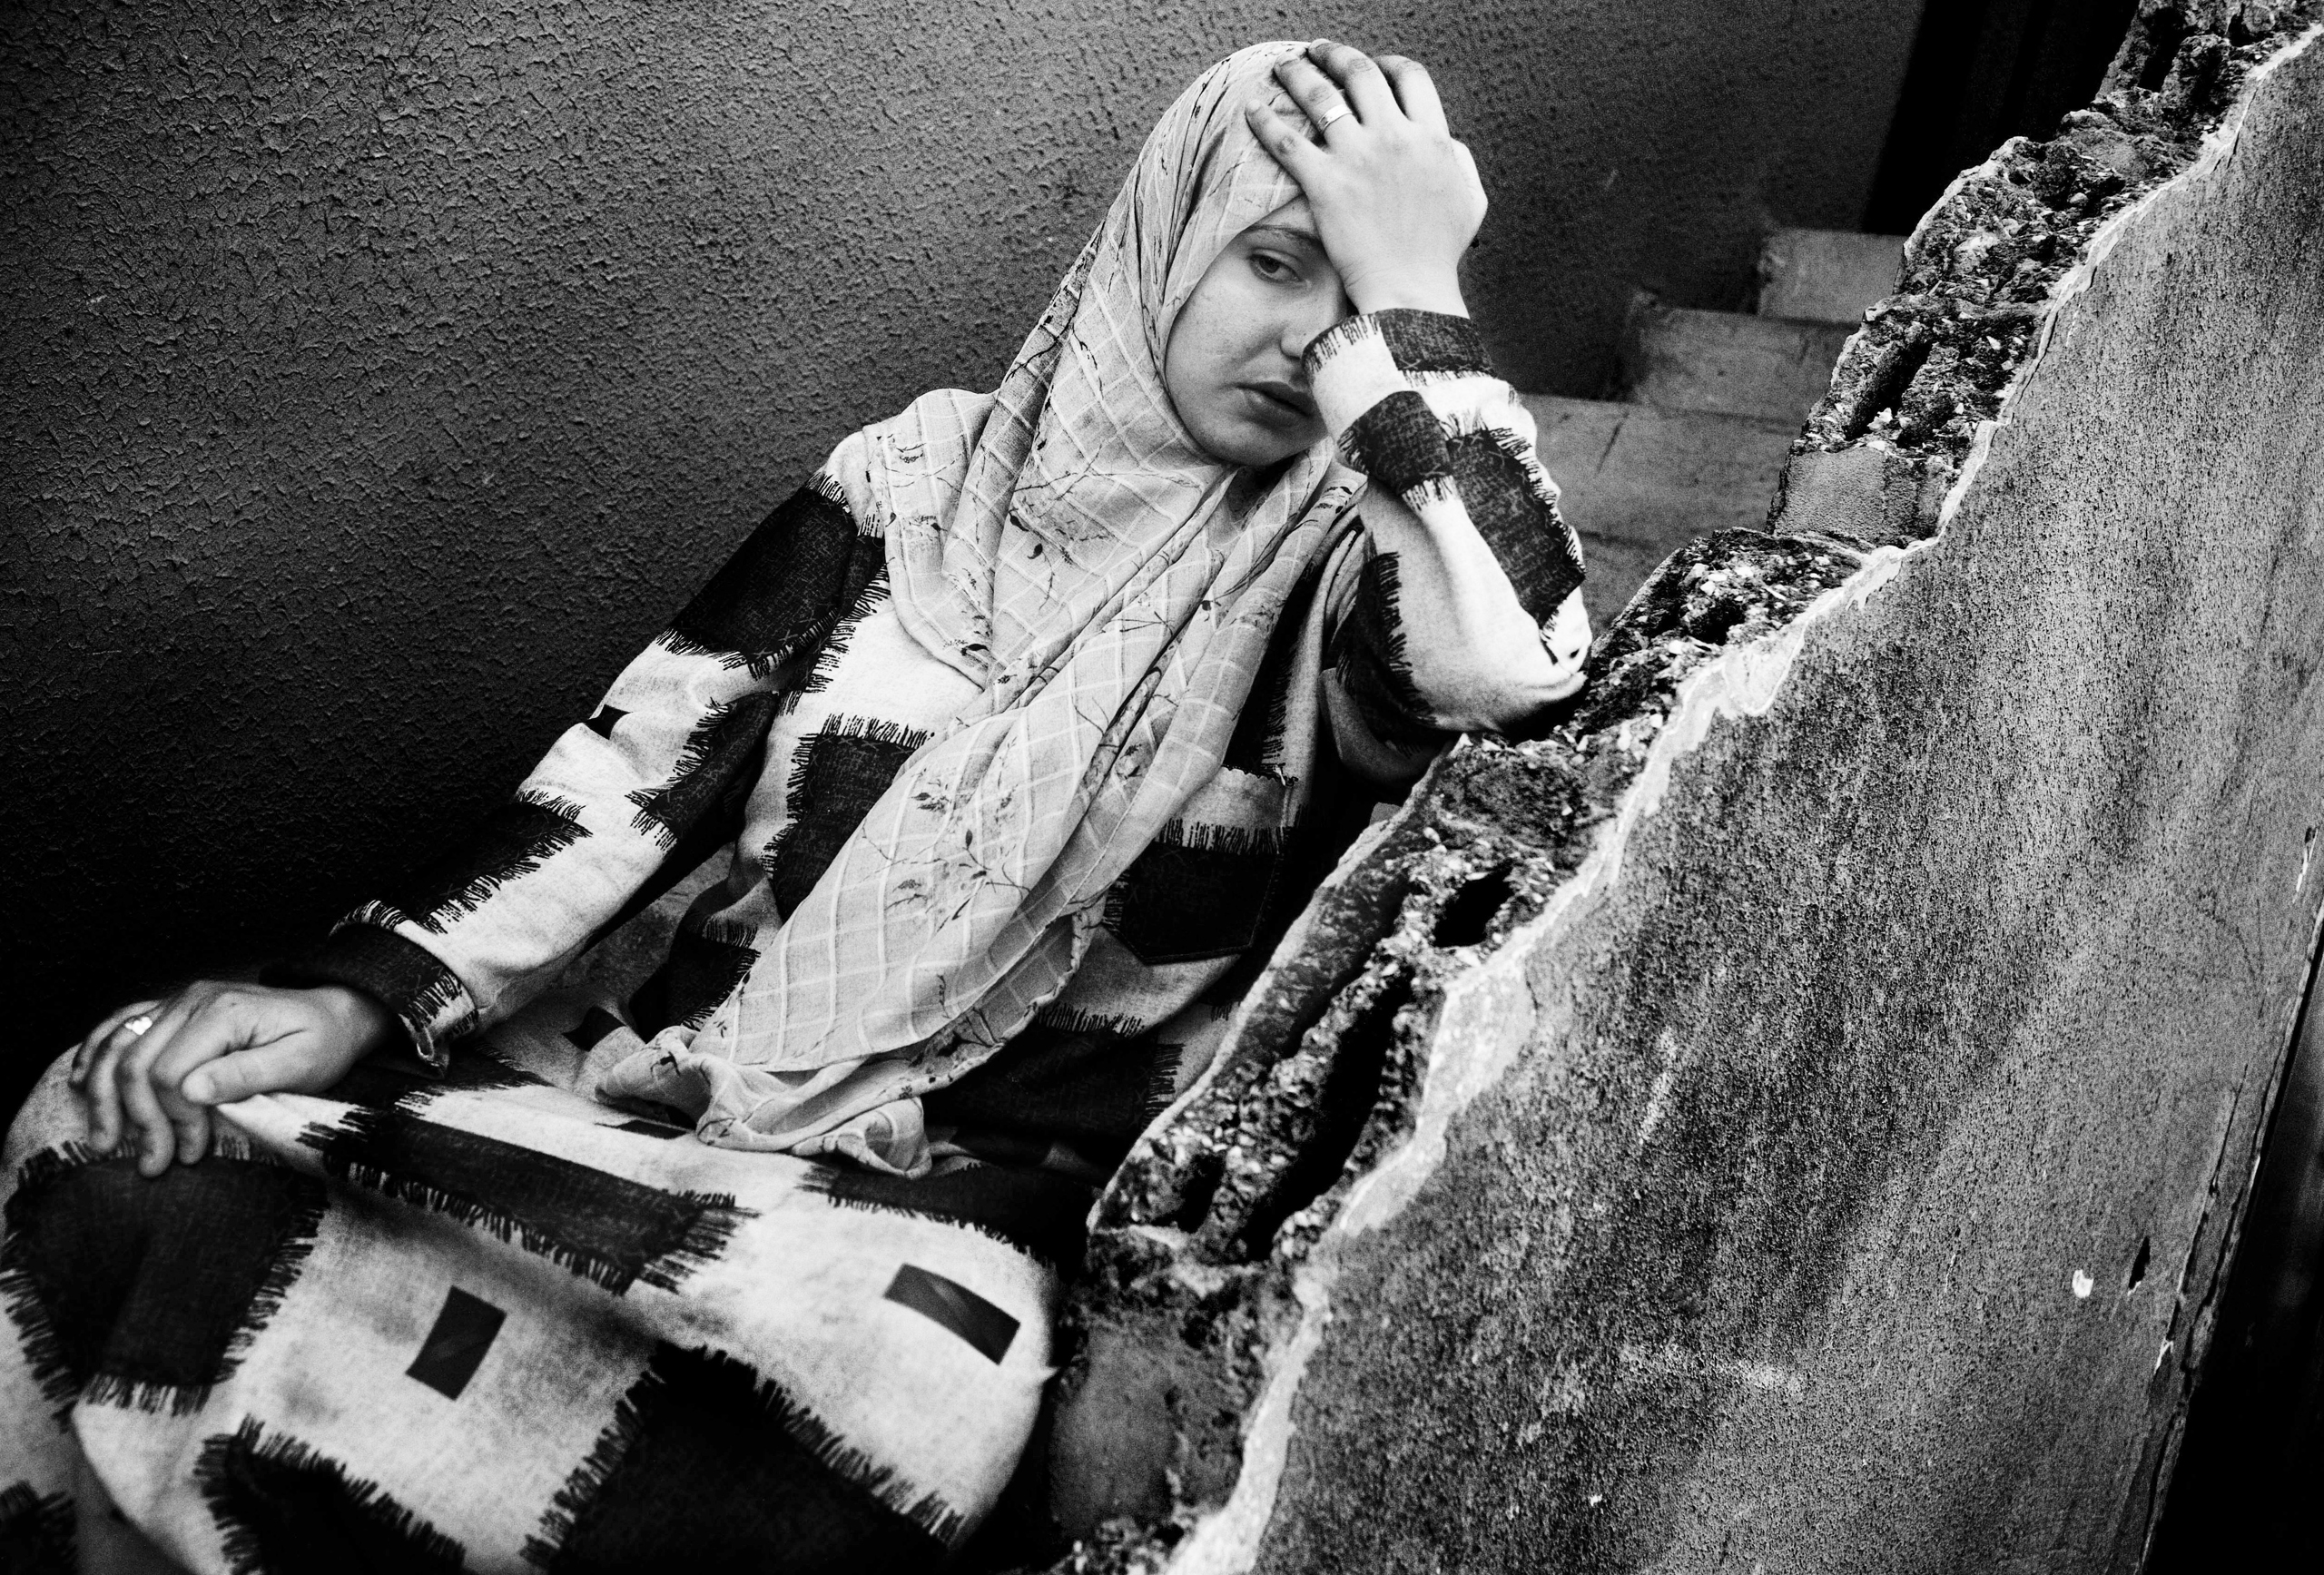 A woman desperate to flee the village is sitting on the stairs of her house. Ramesh, Lebanon, July 2006. (Davide Monteleone)